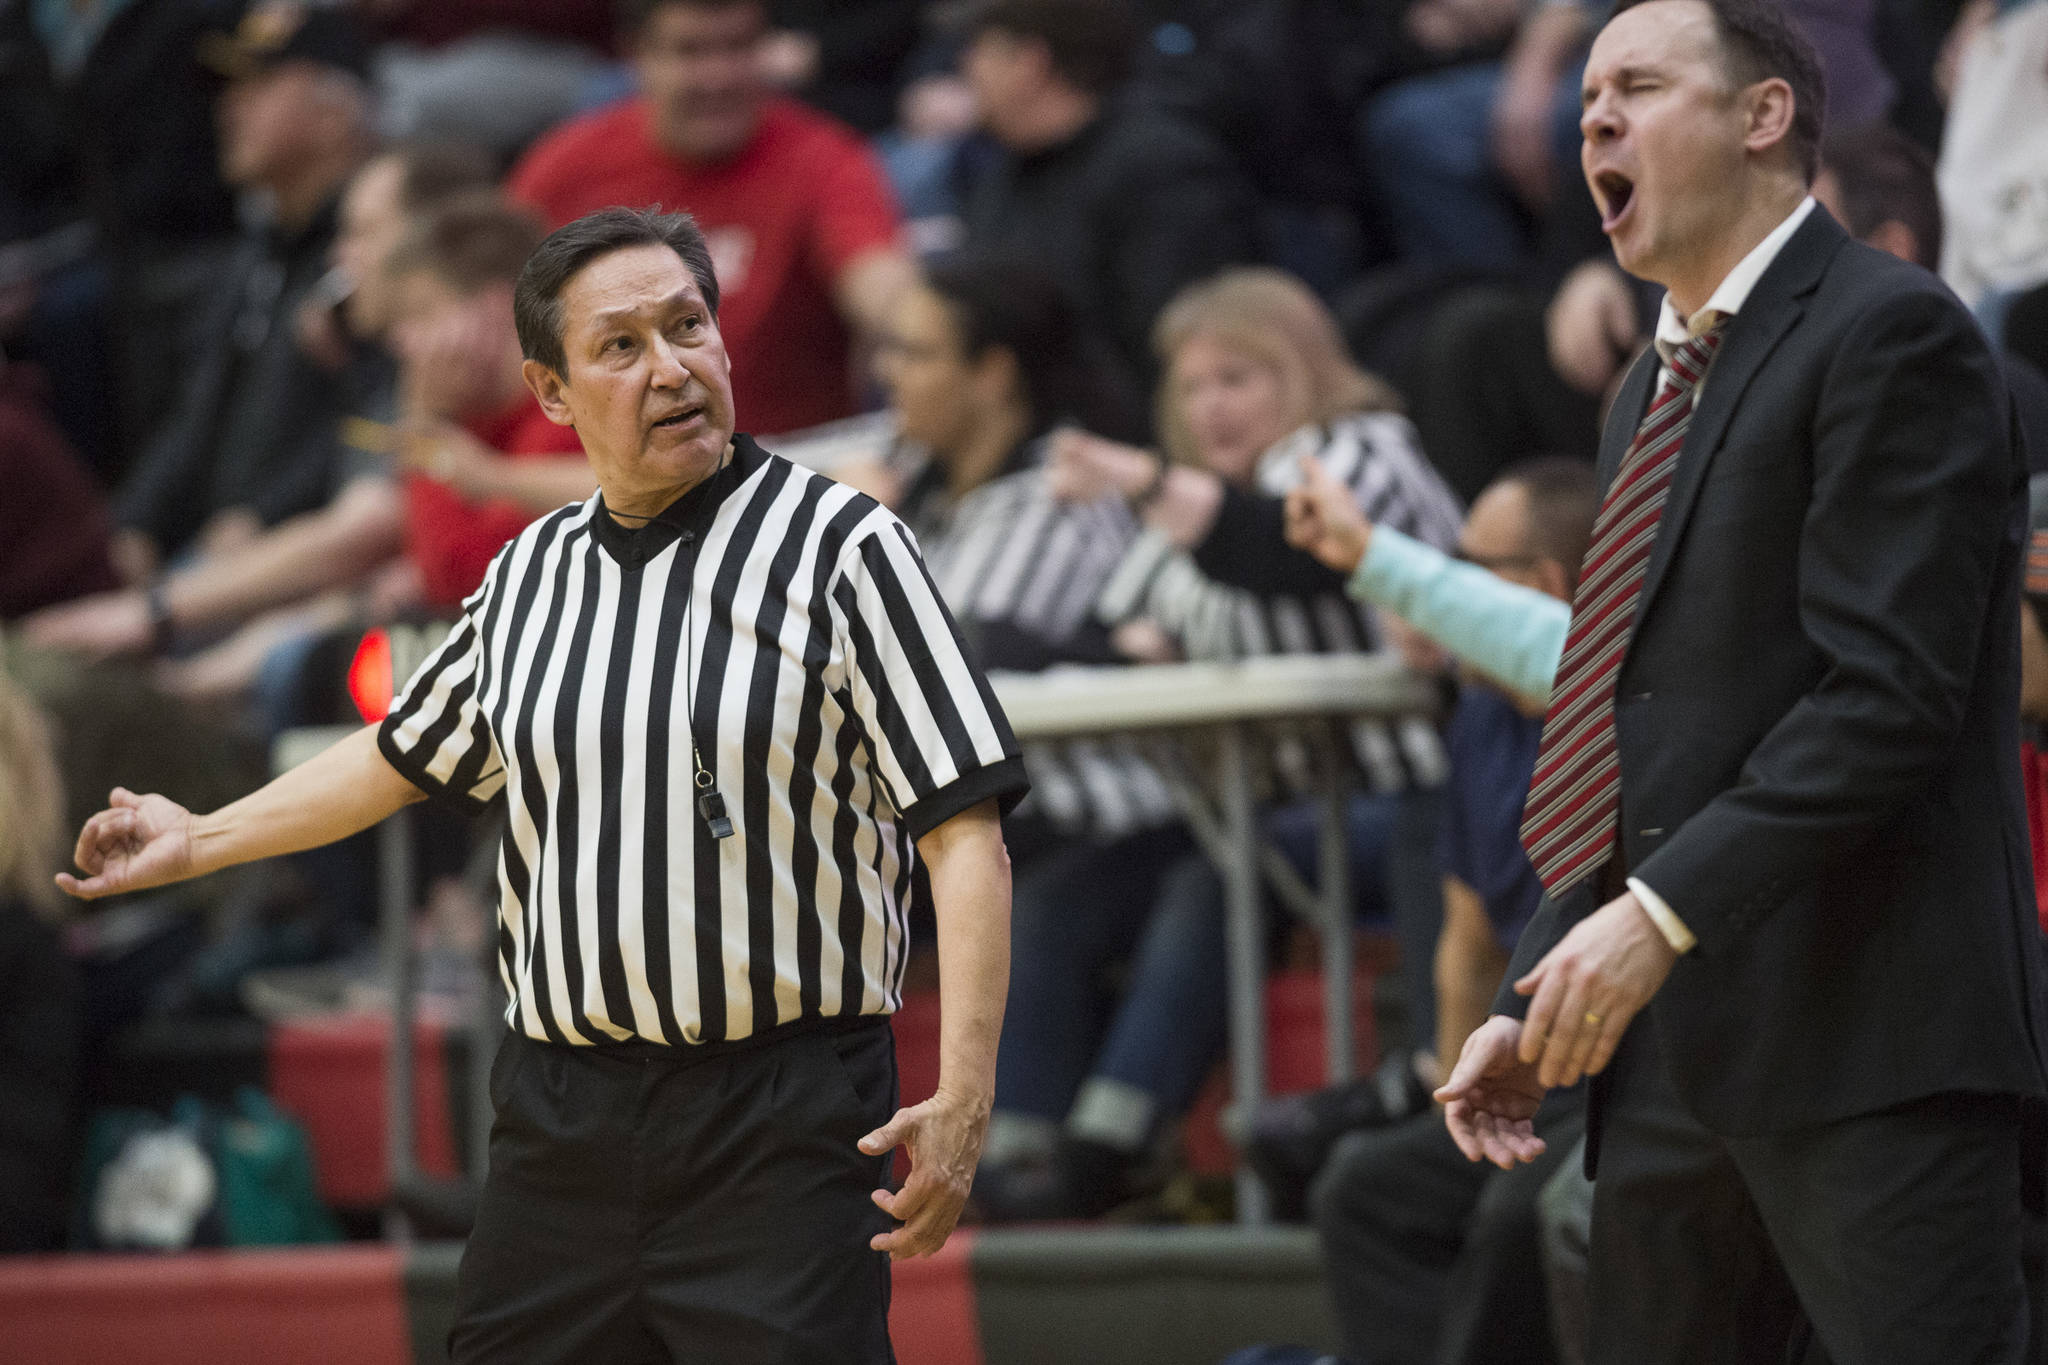 Juneau-Douglas’ coach Robert Casperson reacts to a technical foul call by referee Ron Taug as they play Thunder Mountain at JDHS on Friday, Jan. 25, 2019. Thunder Mountain won 67-63. (Michael Penn | Juneau Empire)